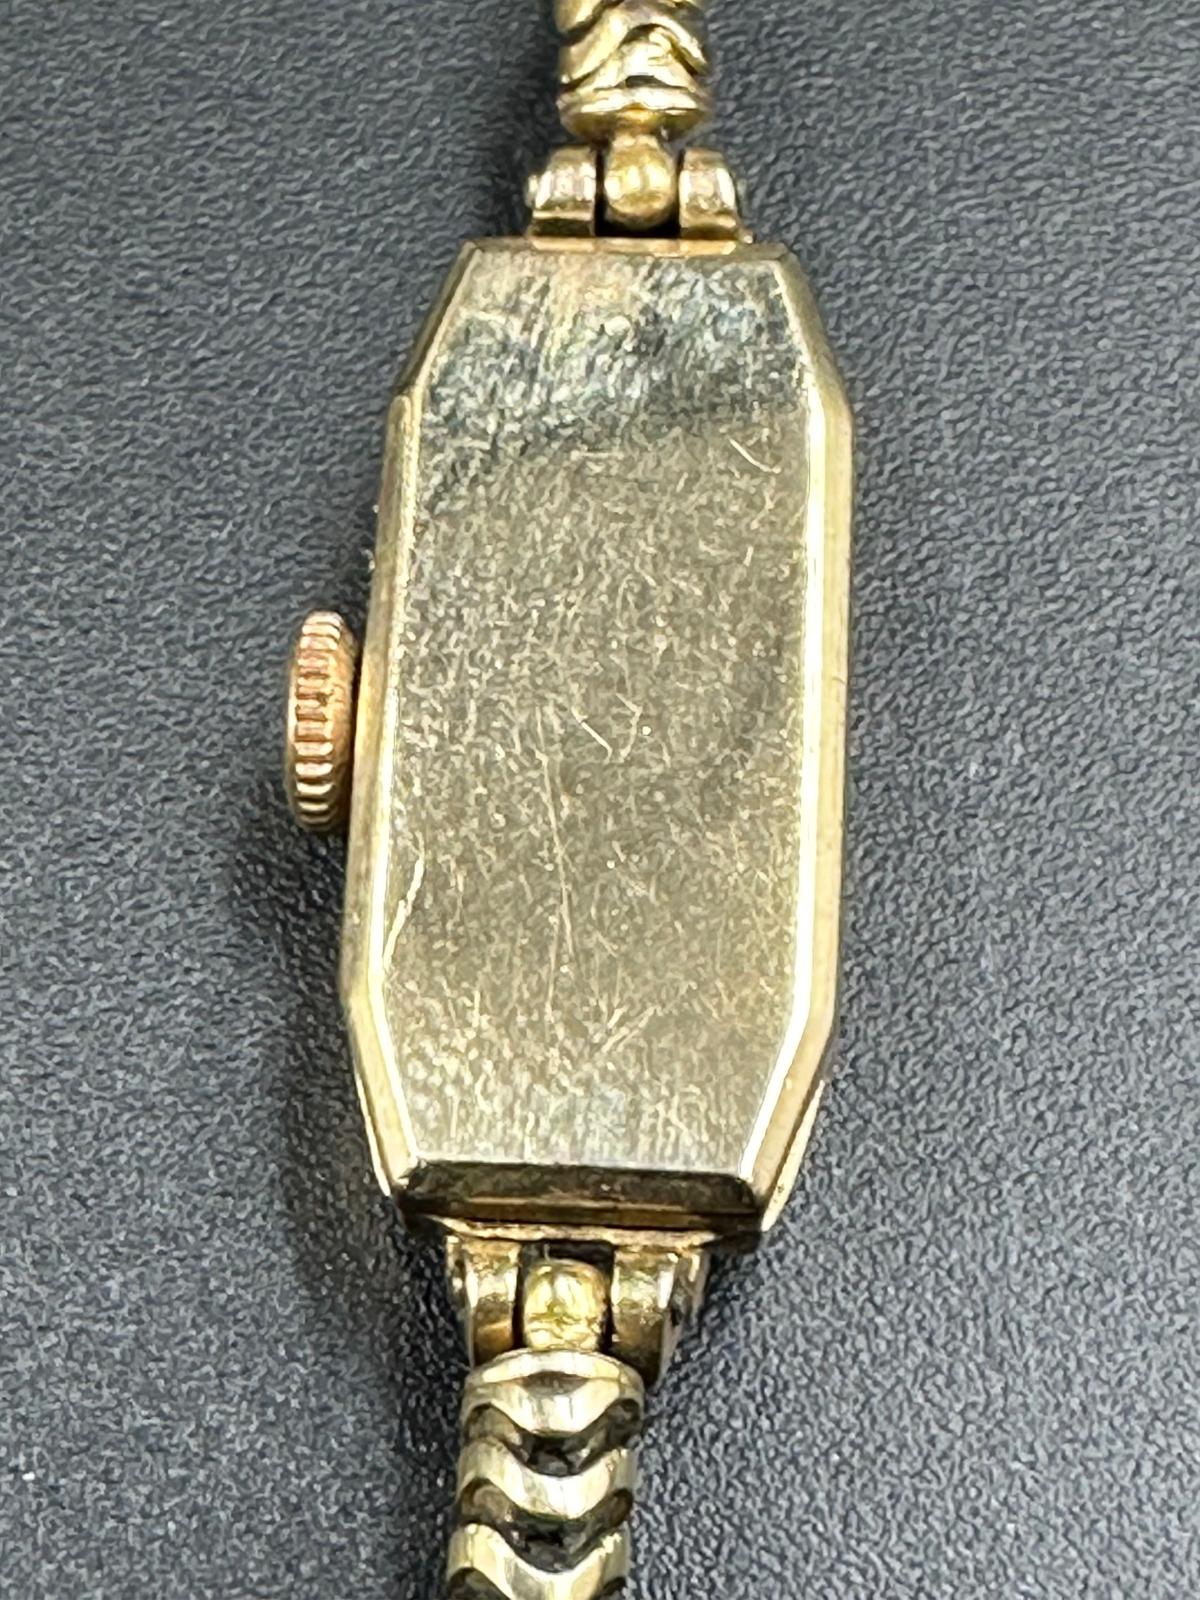 A 9ct Ladies rotary watch on 9ct gold bracelet, with an approximate total weight of 13.4g - Image 2 of 4